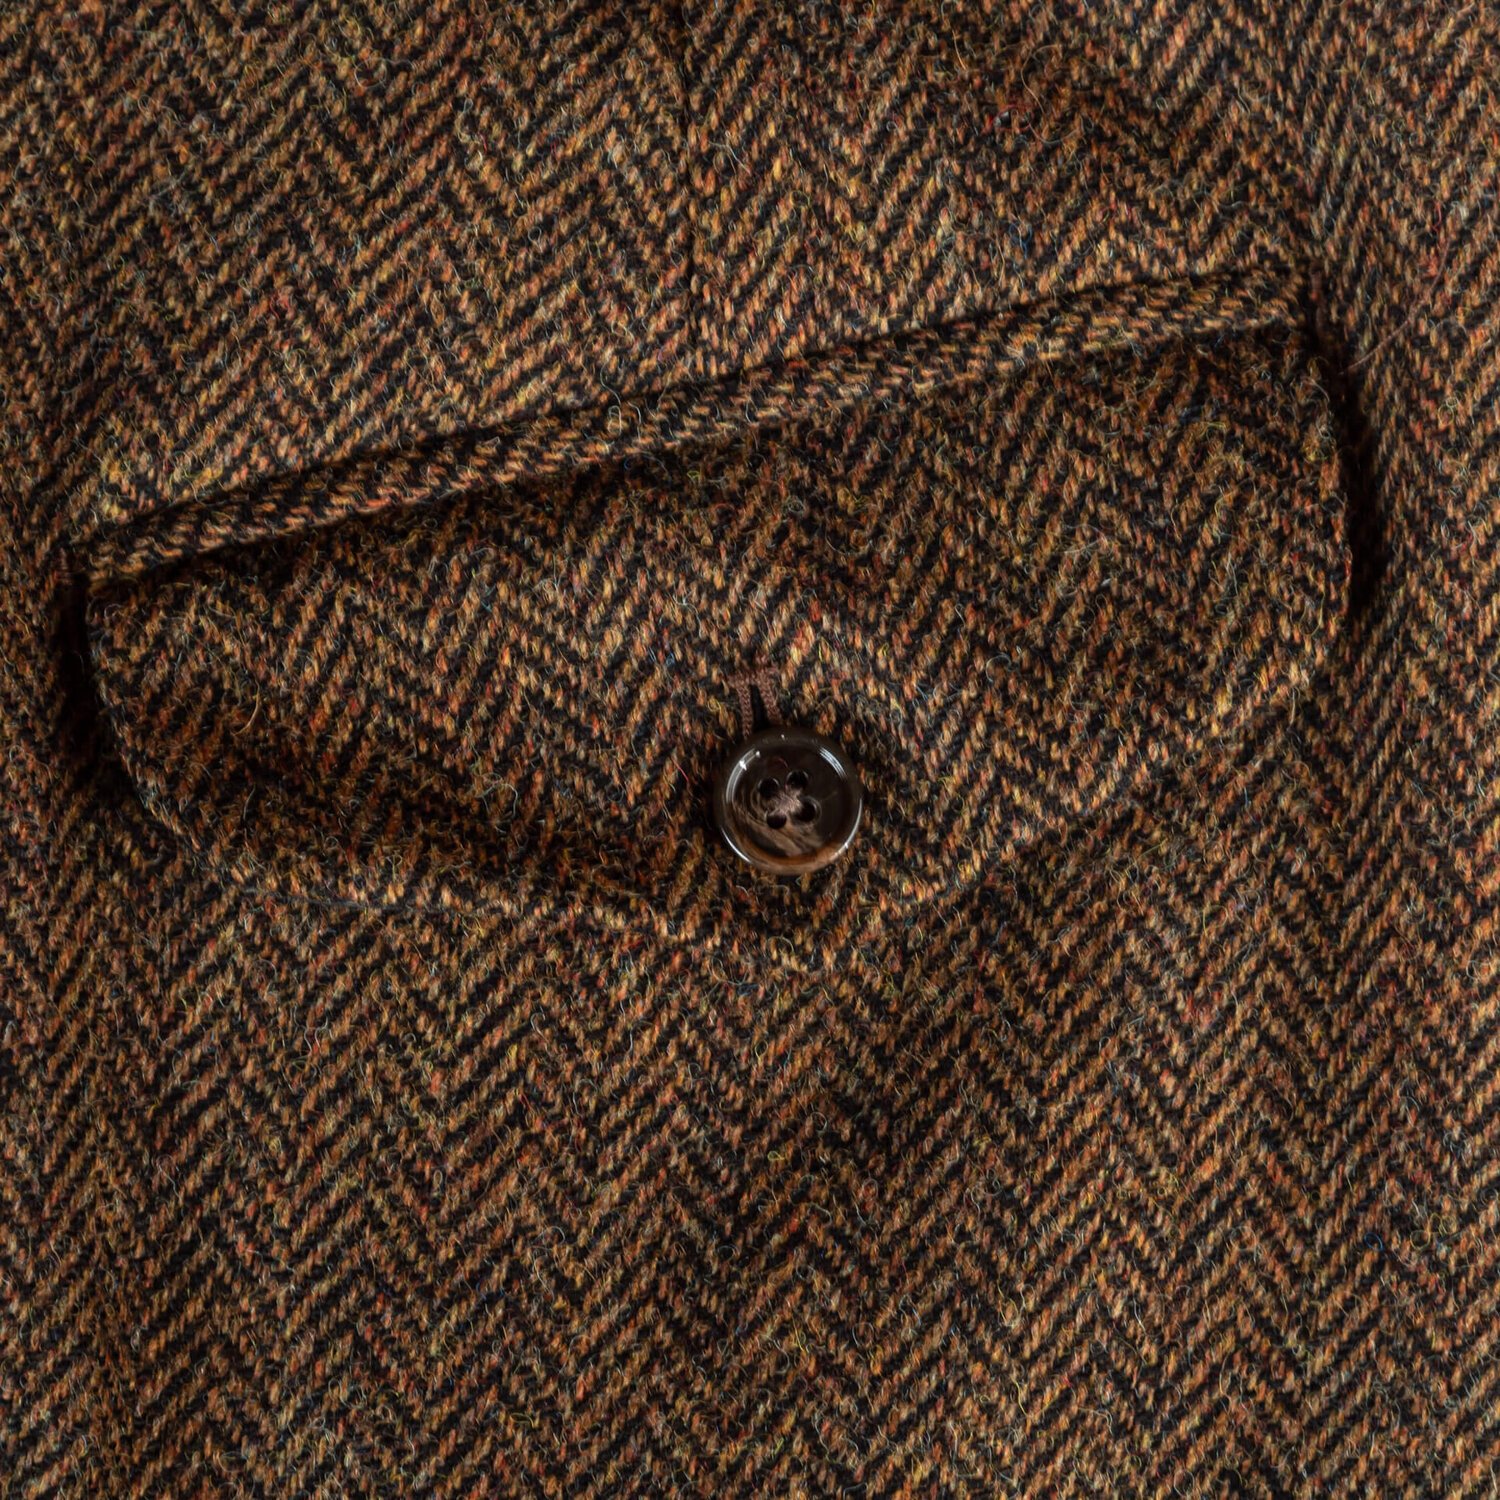 Tweed Trousers Hunting Outfit